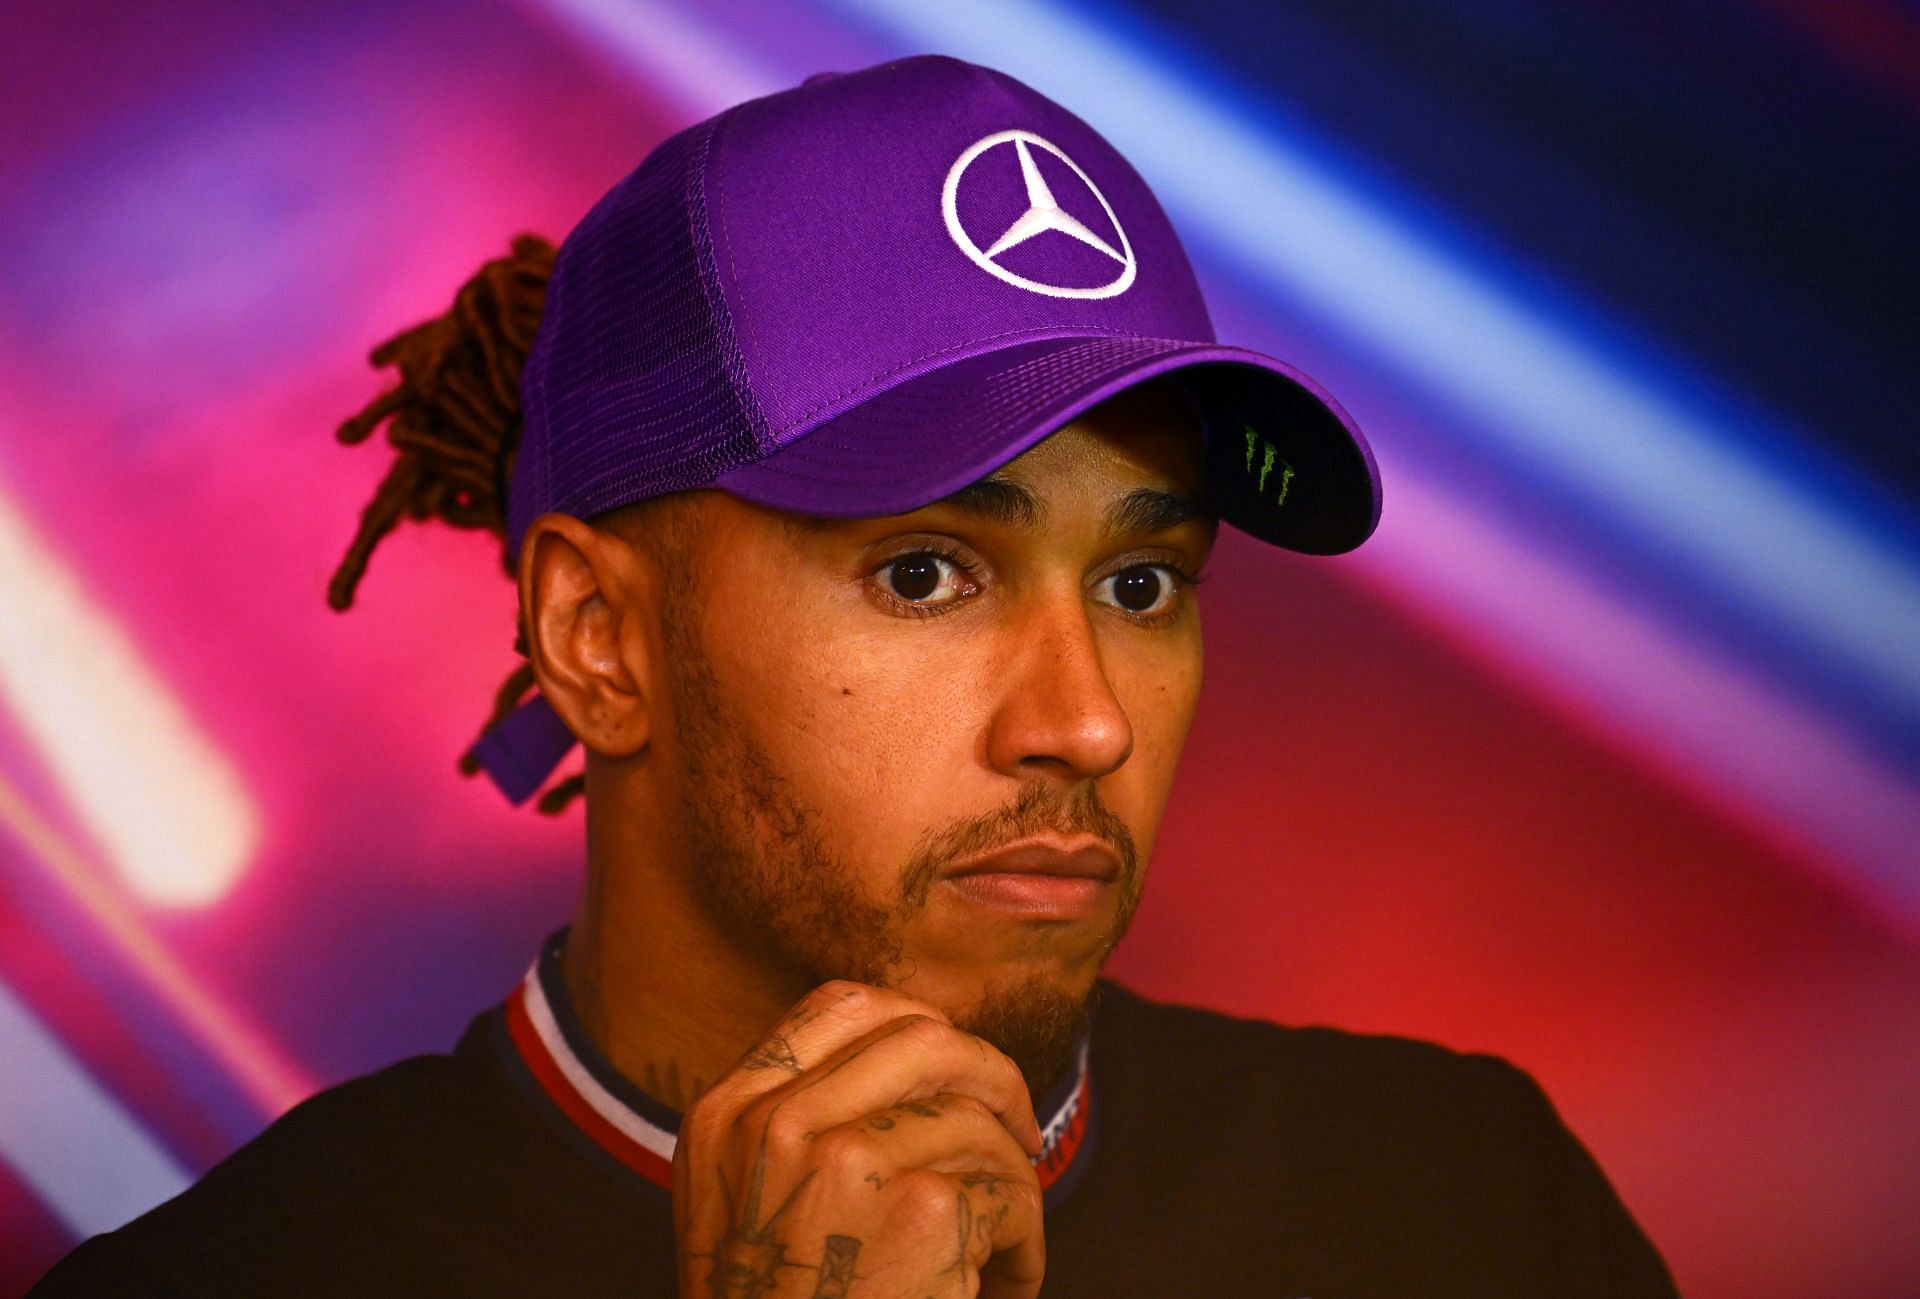 Hamilton attends the press conference after the F1 Grand Prix of Canada at Circuit Gilles Villeneuve on June 19, 2022 in Montreal, Quebec. (Photo by Clive Mason/Getty Images)